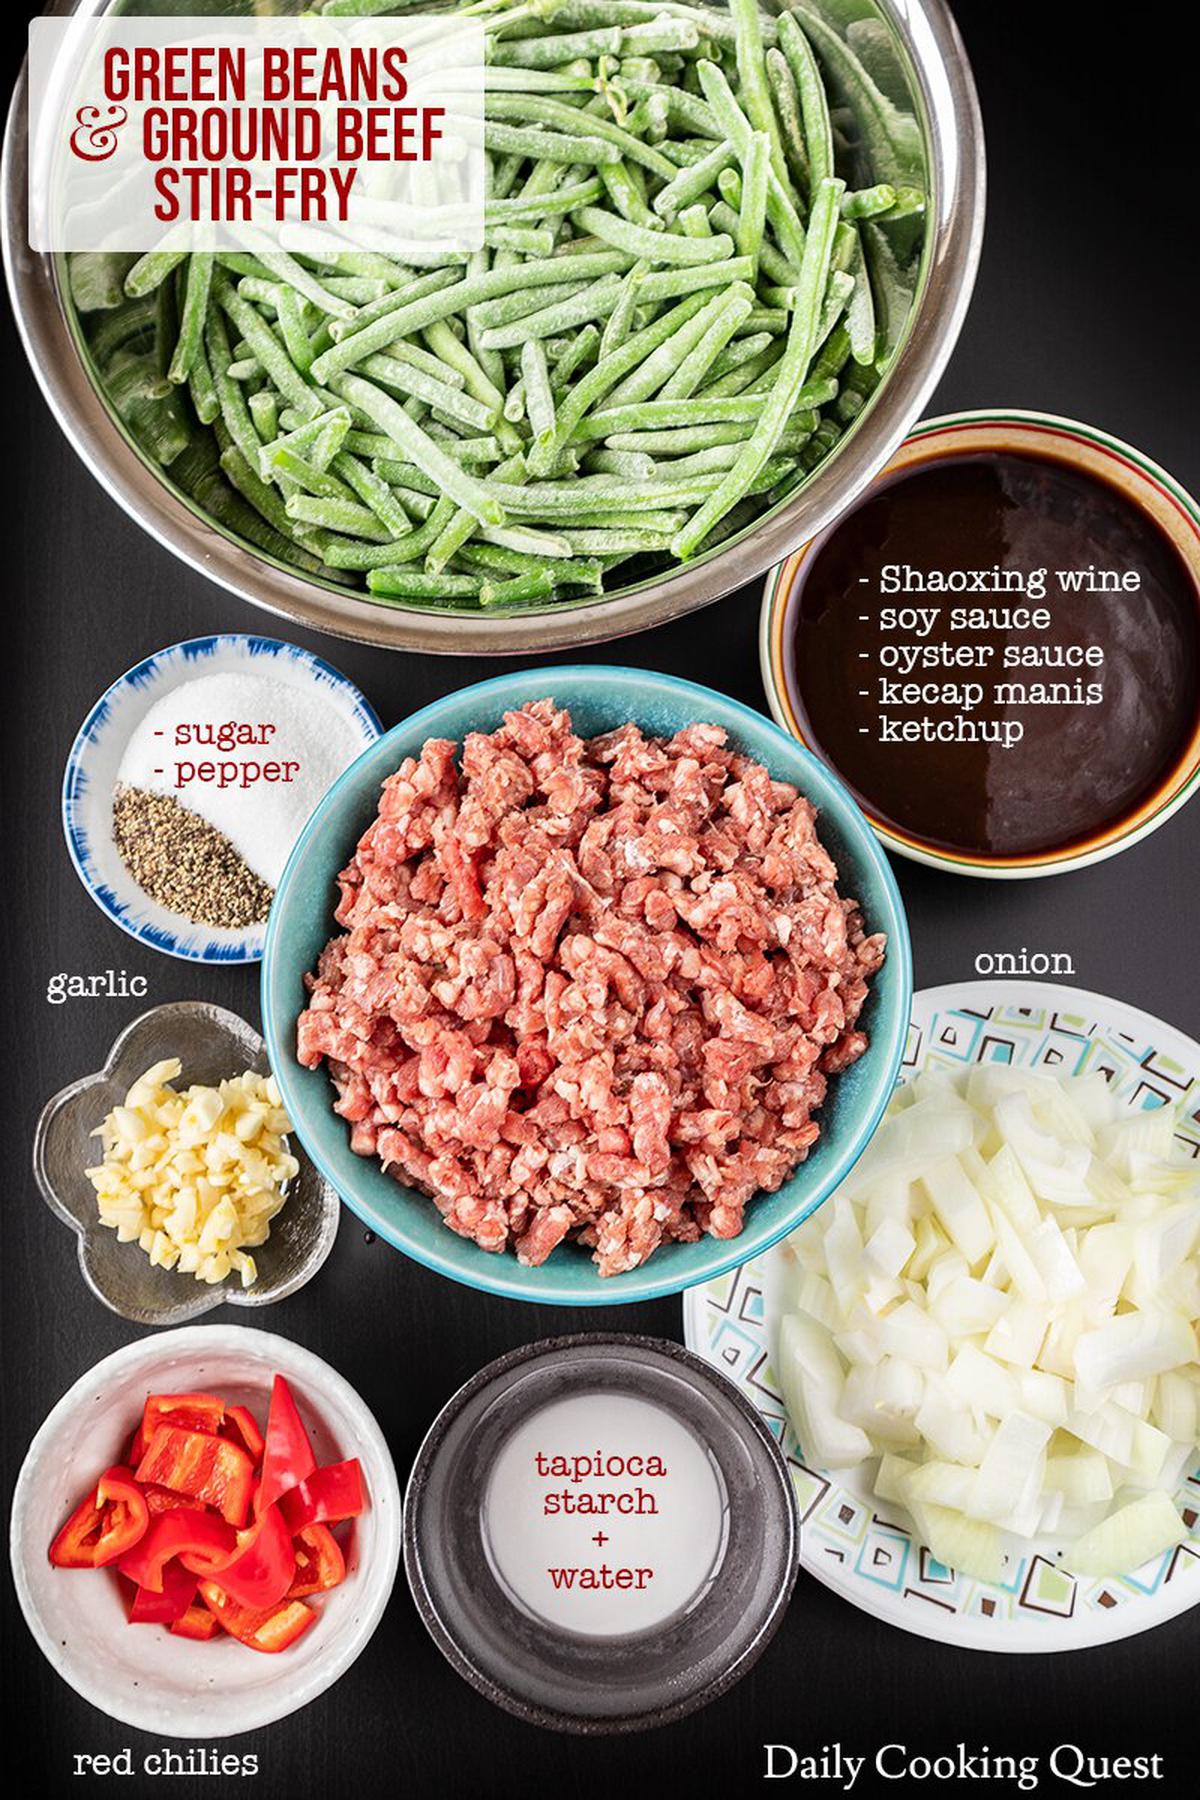 Ingredients to prepare green beans and ground beef stir-fry: green beans, ground beef, onion, garlic, red chilies, Shaoxing wine, soy sauce, oyster sauce, kecap manis (Indonesian sweet soy sauce), ketchup, sugar, ground pepper, tapioca starch, and water.